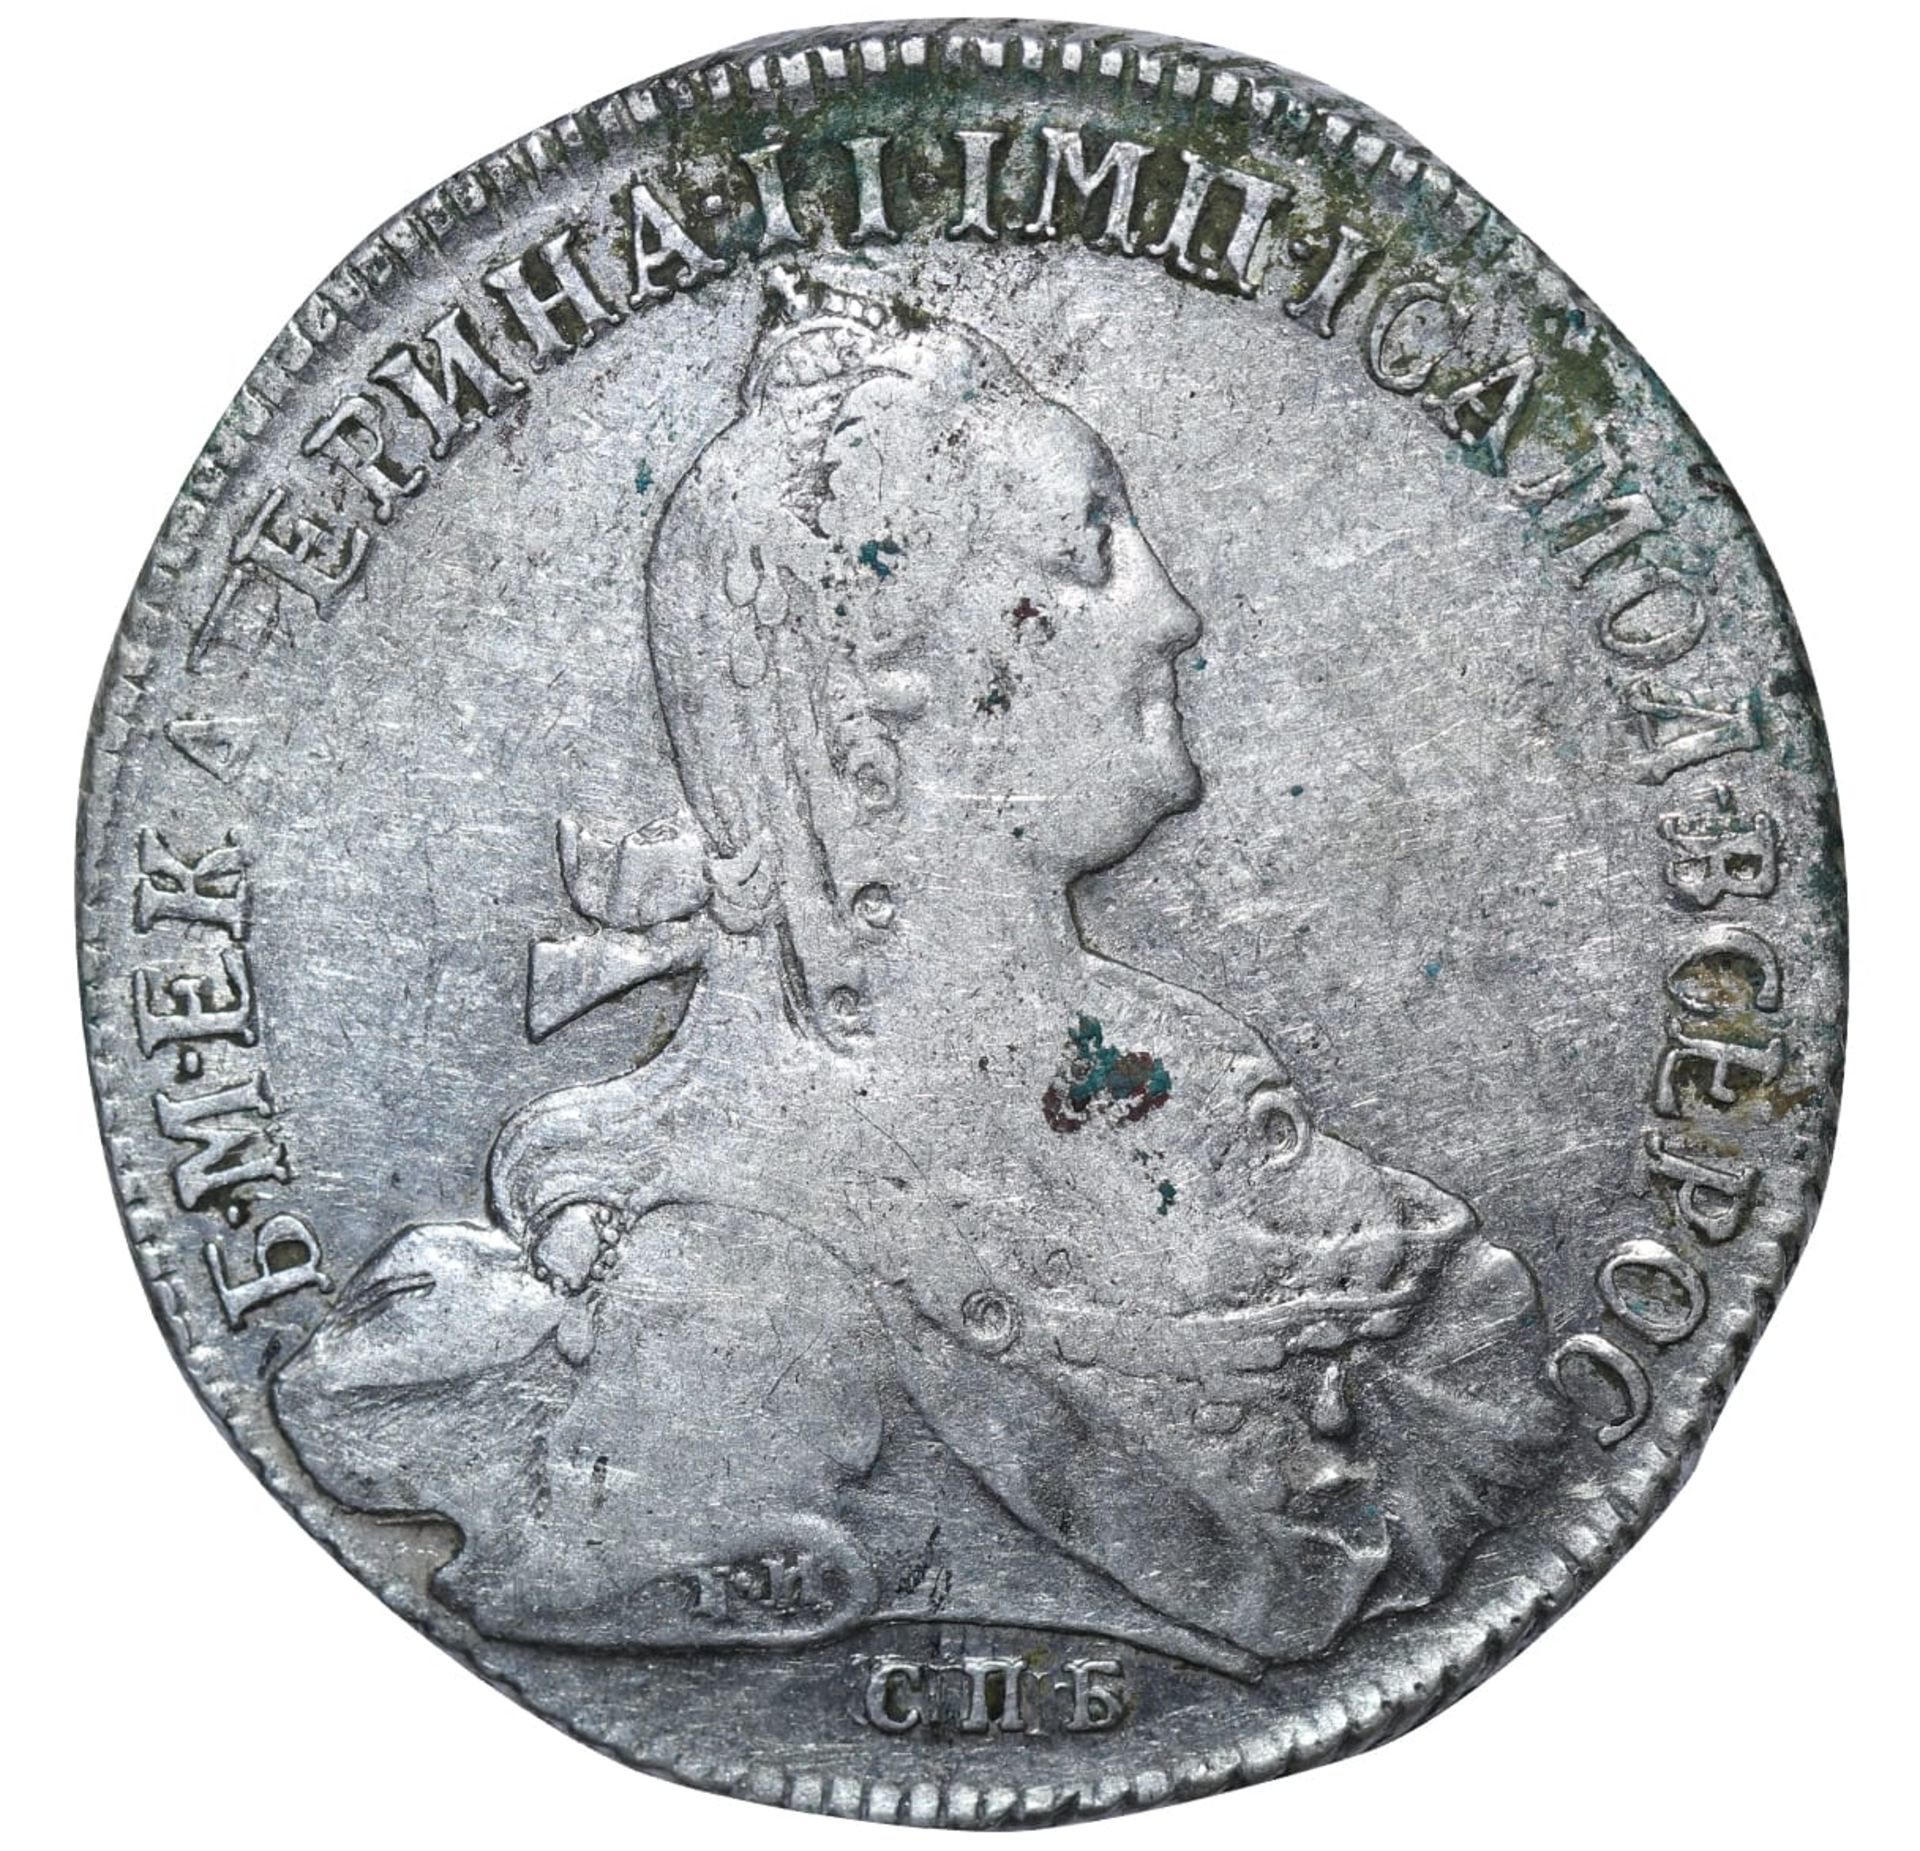 Russian Empire, 1 Rouble, 1774 year, SPB-FL - Image 2 of 3